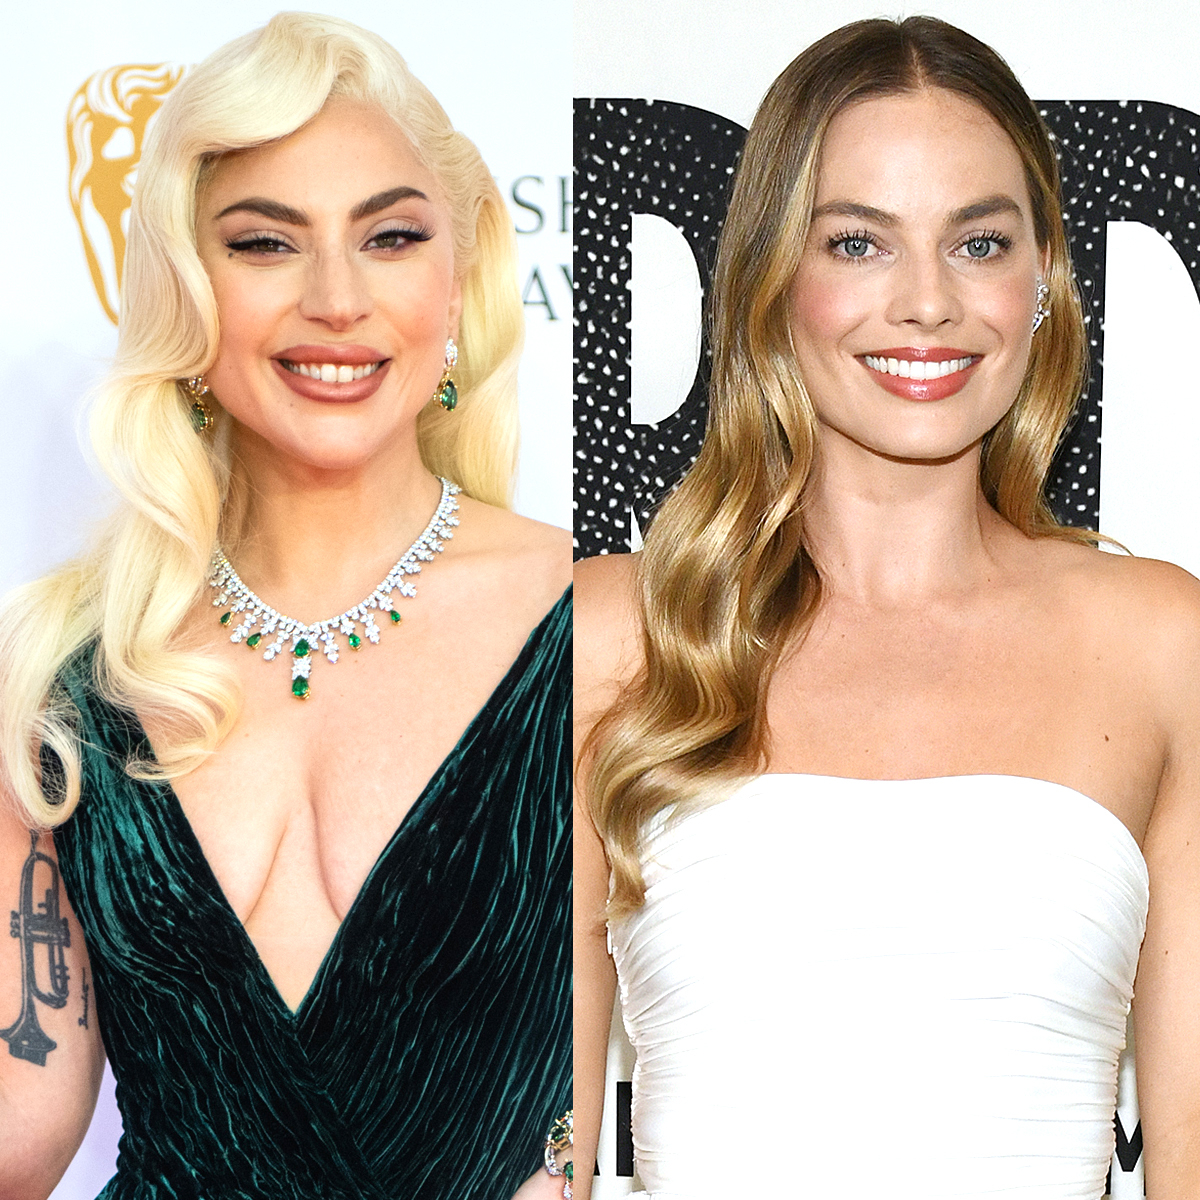 https://akns-images.eonline.com/eol_images/Entire_Site/2022910/rs_1200x1200-221010155147-1200-lady-gaga-margot-robbie.cm.101022.jpg?fit=around%7C1200:1200&output-quality=90&crop=1200:1200;center,top